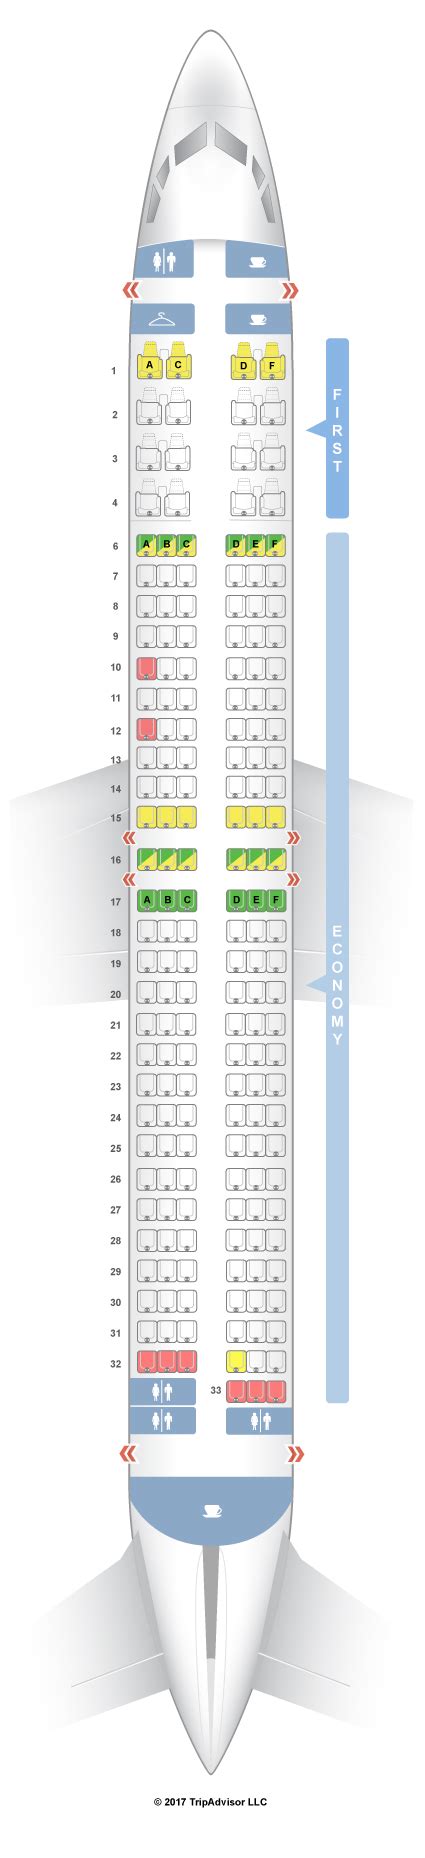 Boeing 737-900 operated by Alaska Airlines may accommodate 181 passengers in two classes. First class consists of 4 rows of seats that have 2-2 configuration. The seats of the 1st row have the following disadvantages: close location of the galleys, limited legroom and lack of floor storage during take-off and landing.. 